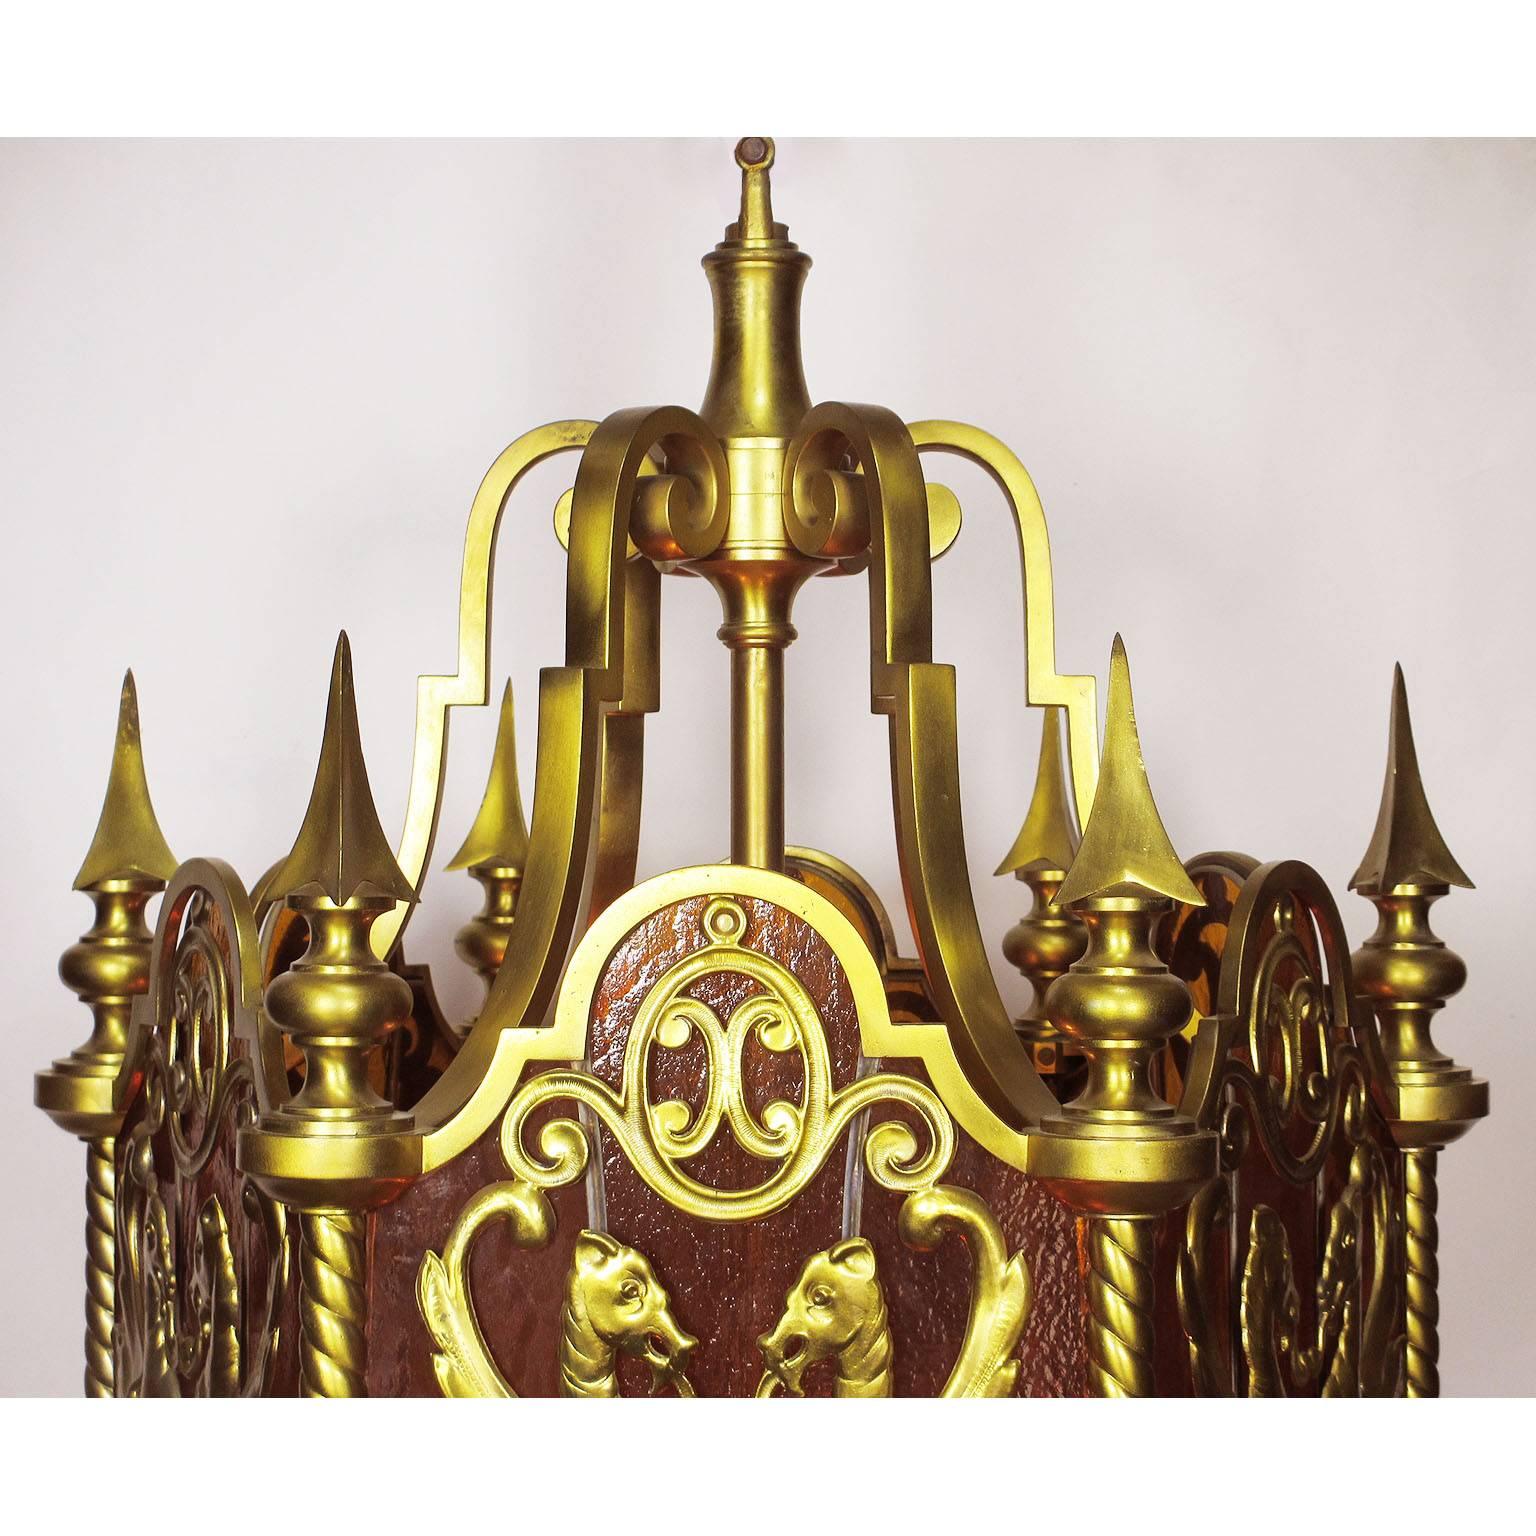 French 19th-20th Century Neoclassical Style Gilt Bronze Figural Hanging Lantern For Sale 1